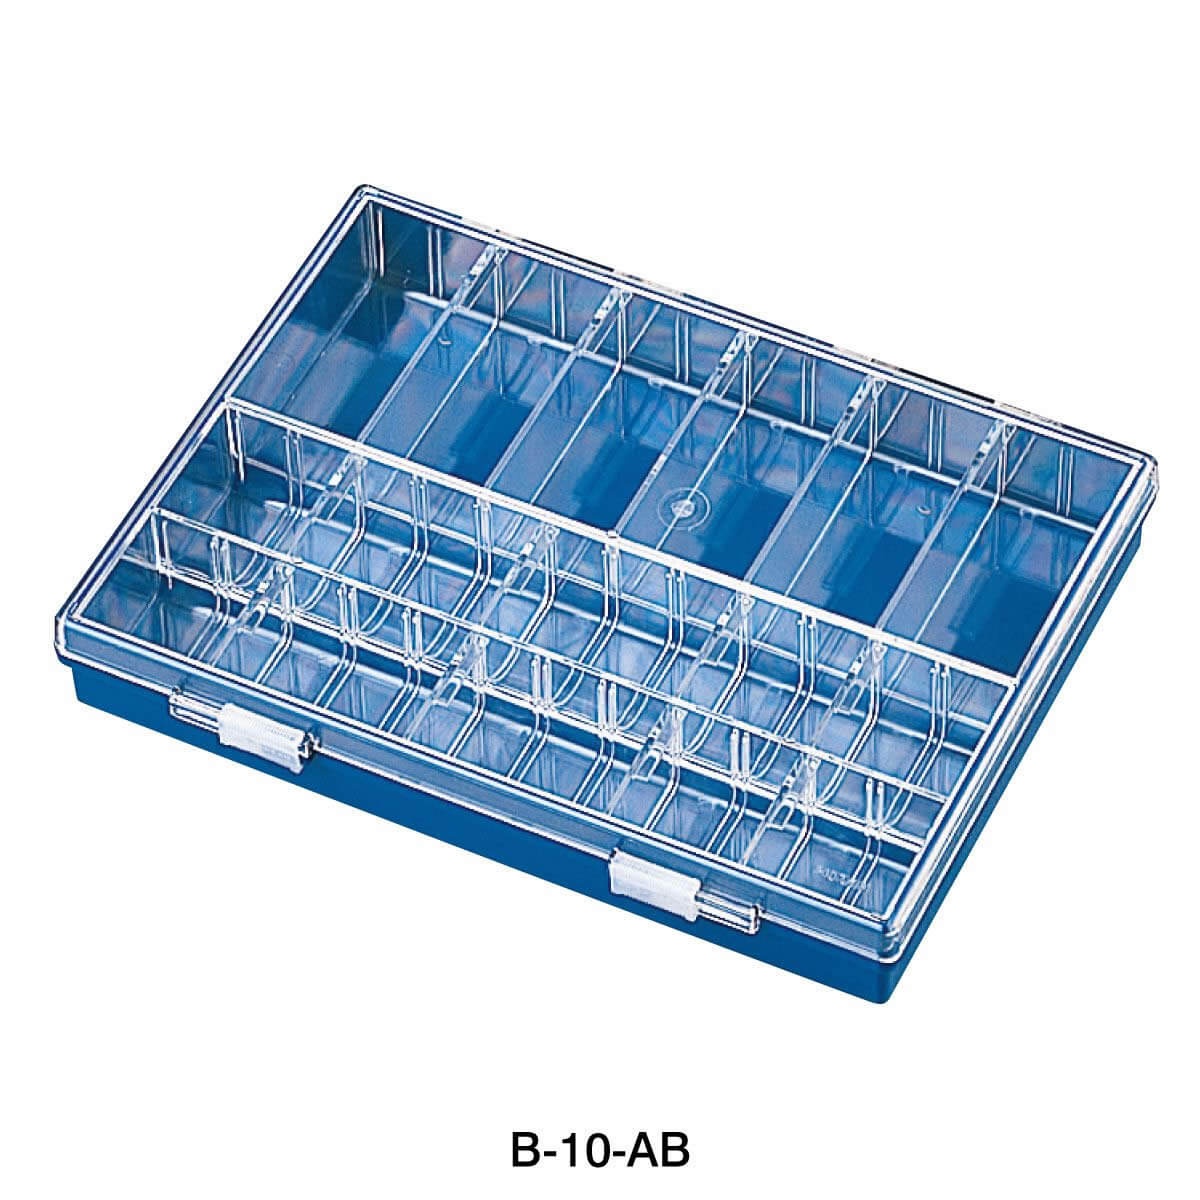 BICYCLE TOOL Parts Case-BB Inner Tray: BB